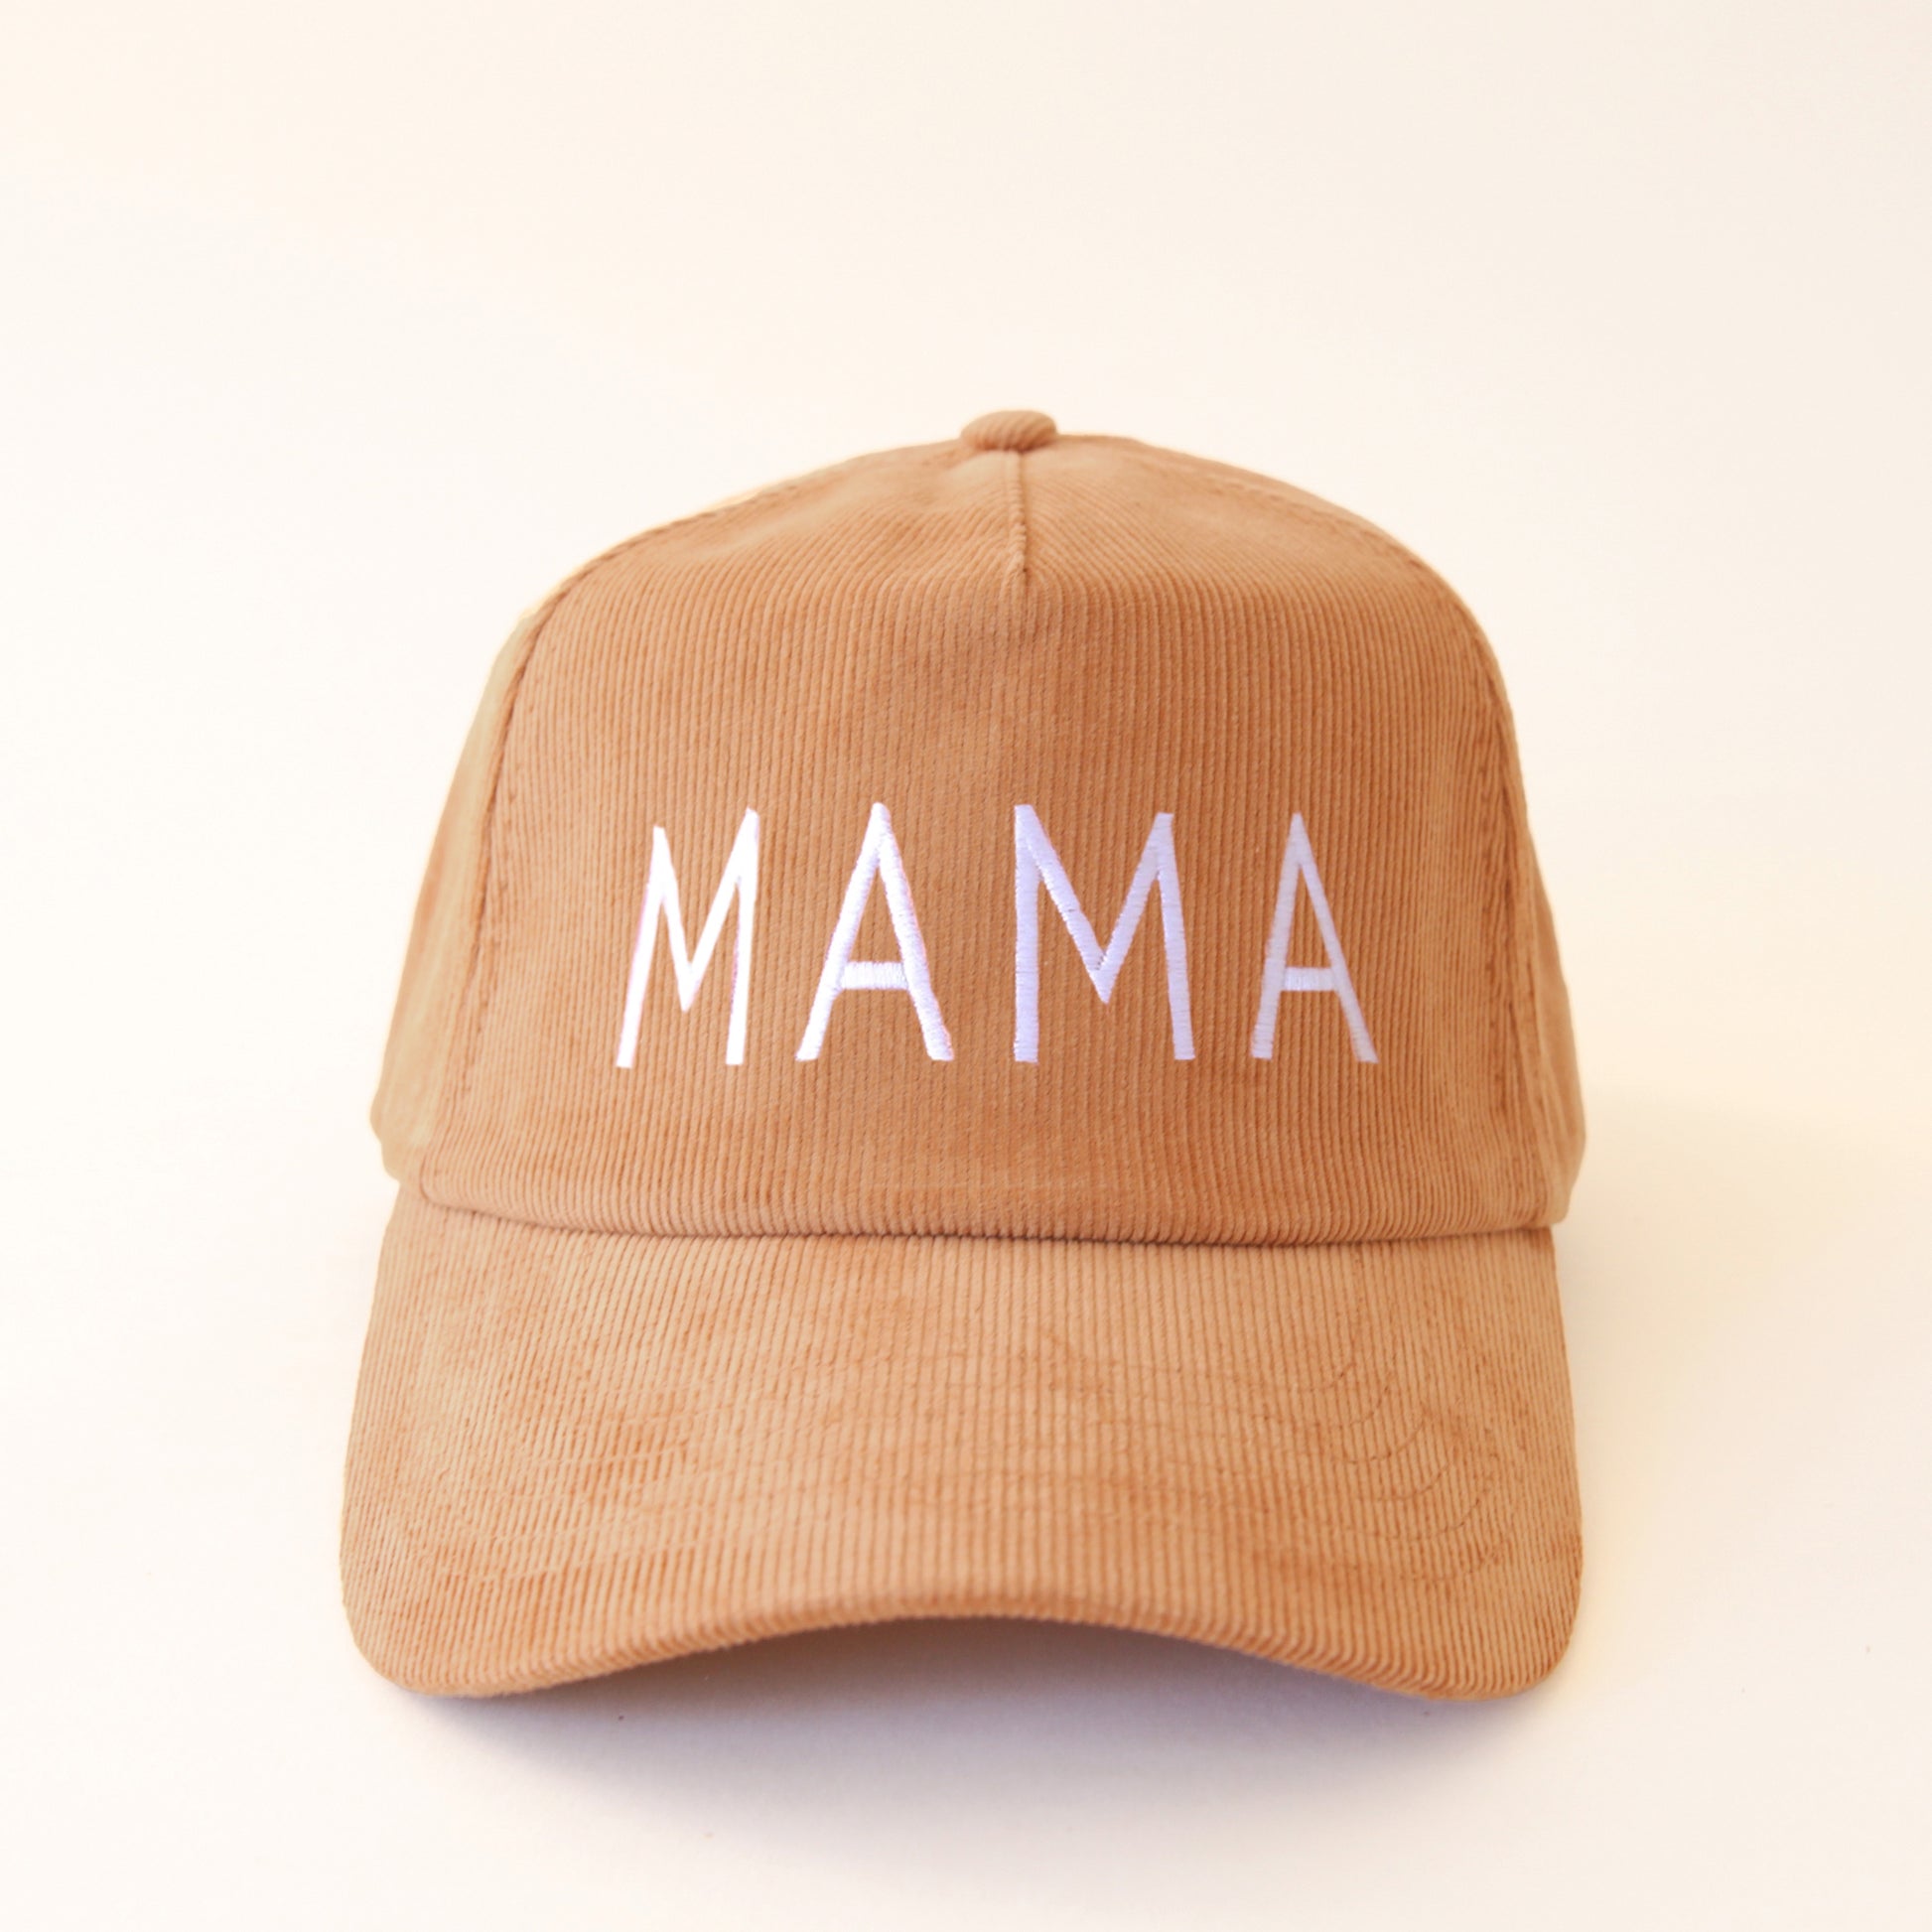 On a cream background is a burnt orange corduroy baseball hat with straight white capital letters that read, "MAMA" across the front.